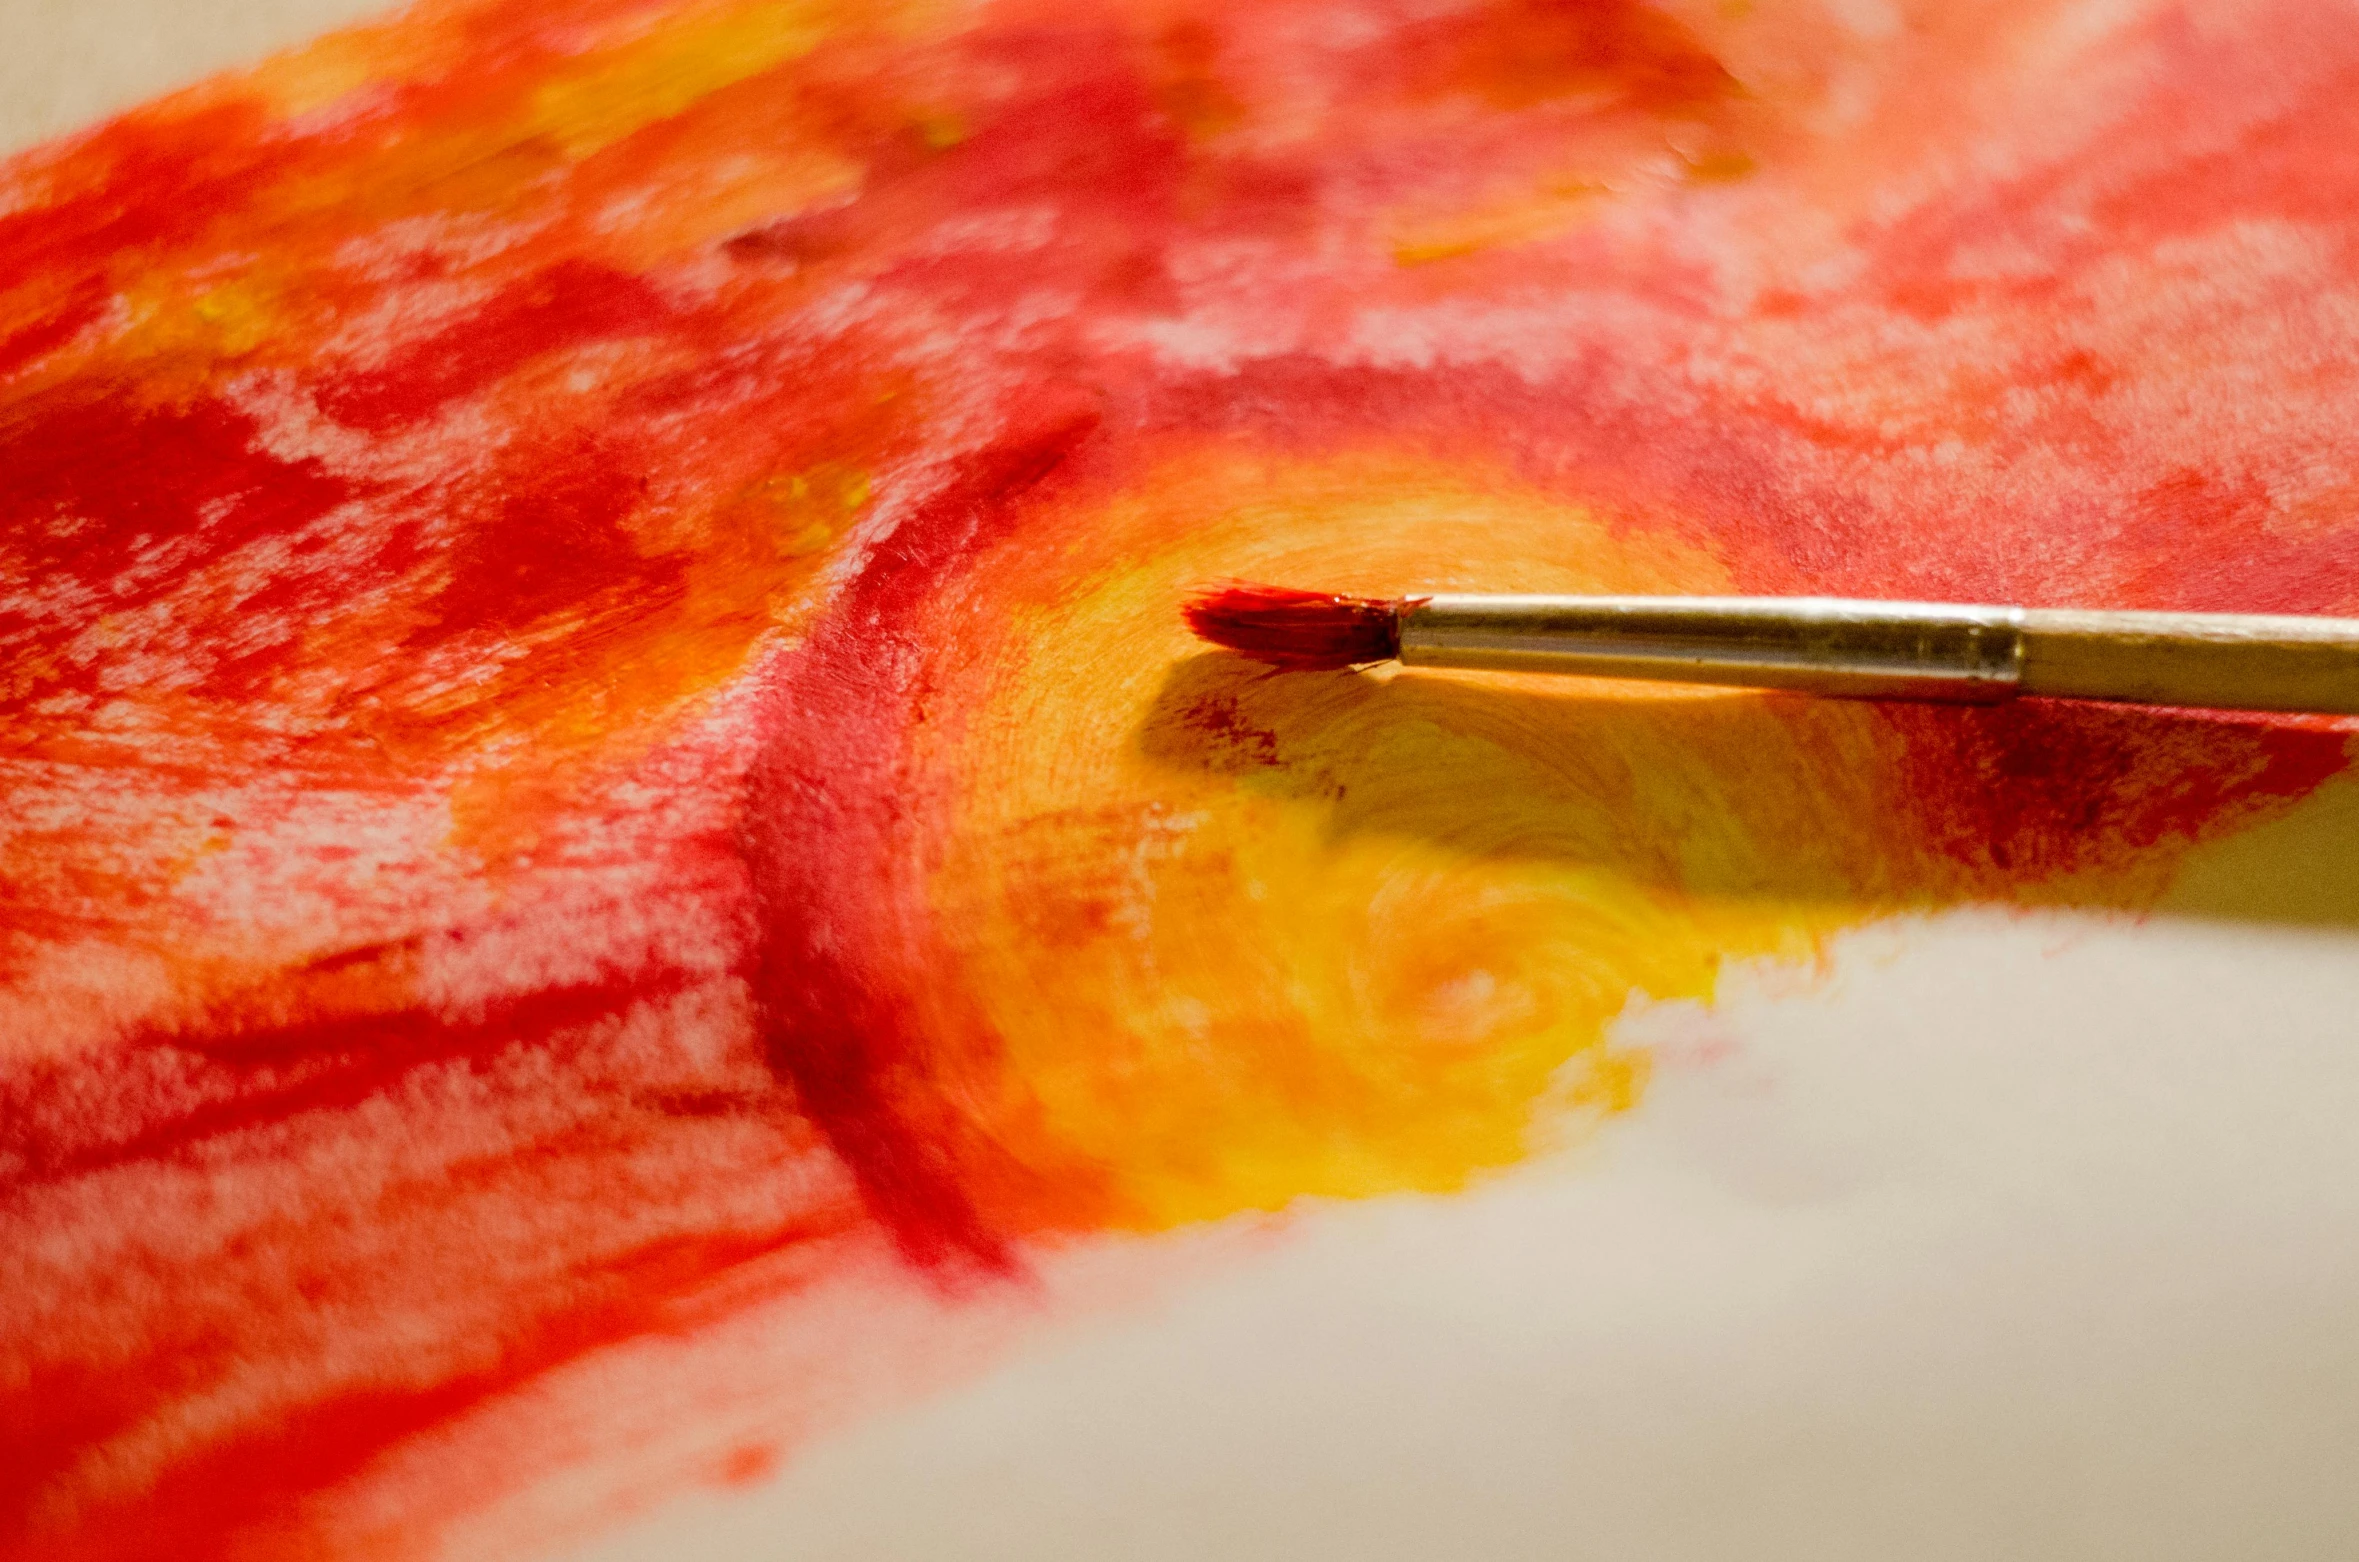 a close up of a paint brush on a piece of paper, a watercolor painting, inspired by Emil Nolde, pexels, yellow and red, painting on canvas, an artistic pose, light red and orange mood